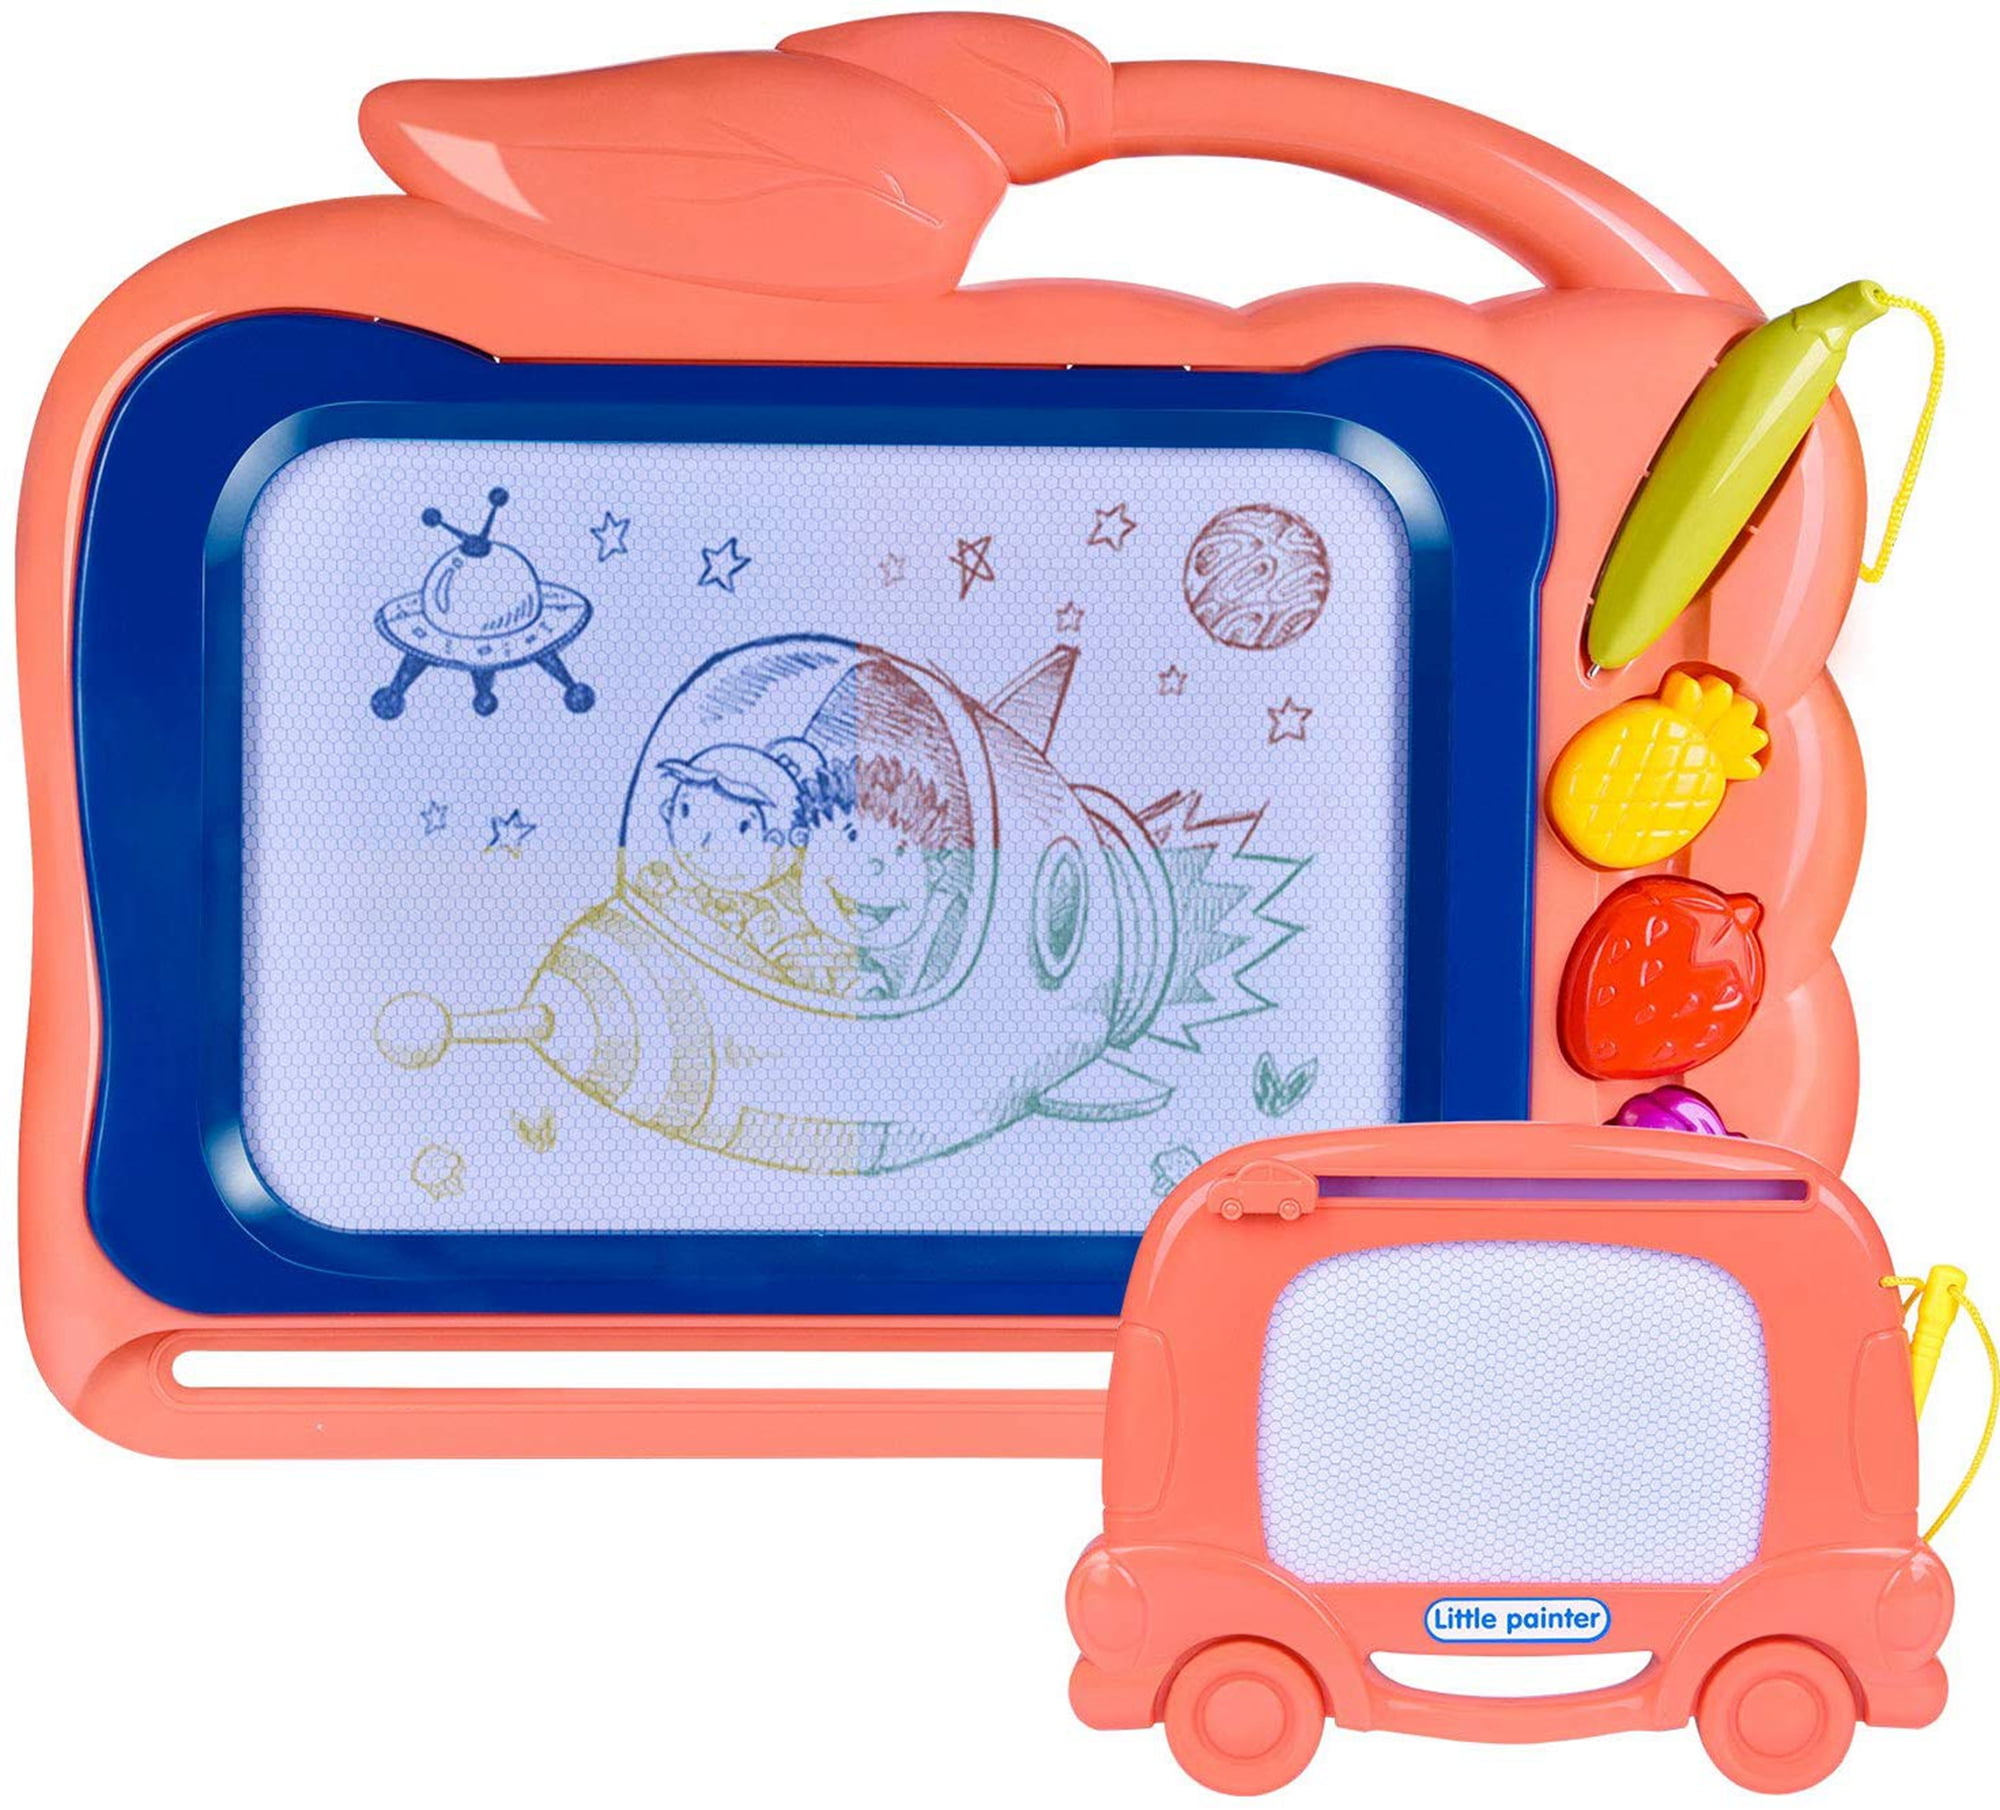 LZZAPJ Magnetic Drawing Board for Kids,Toys for 2 Year Old Girl,Doodle  Board Writing Tablet for Toddlers 1-3, Toddler Travel Learning Toys, First